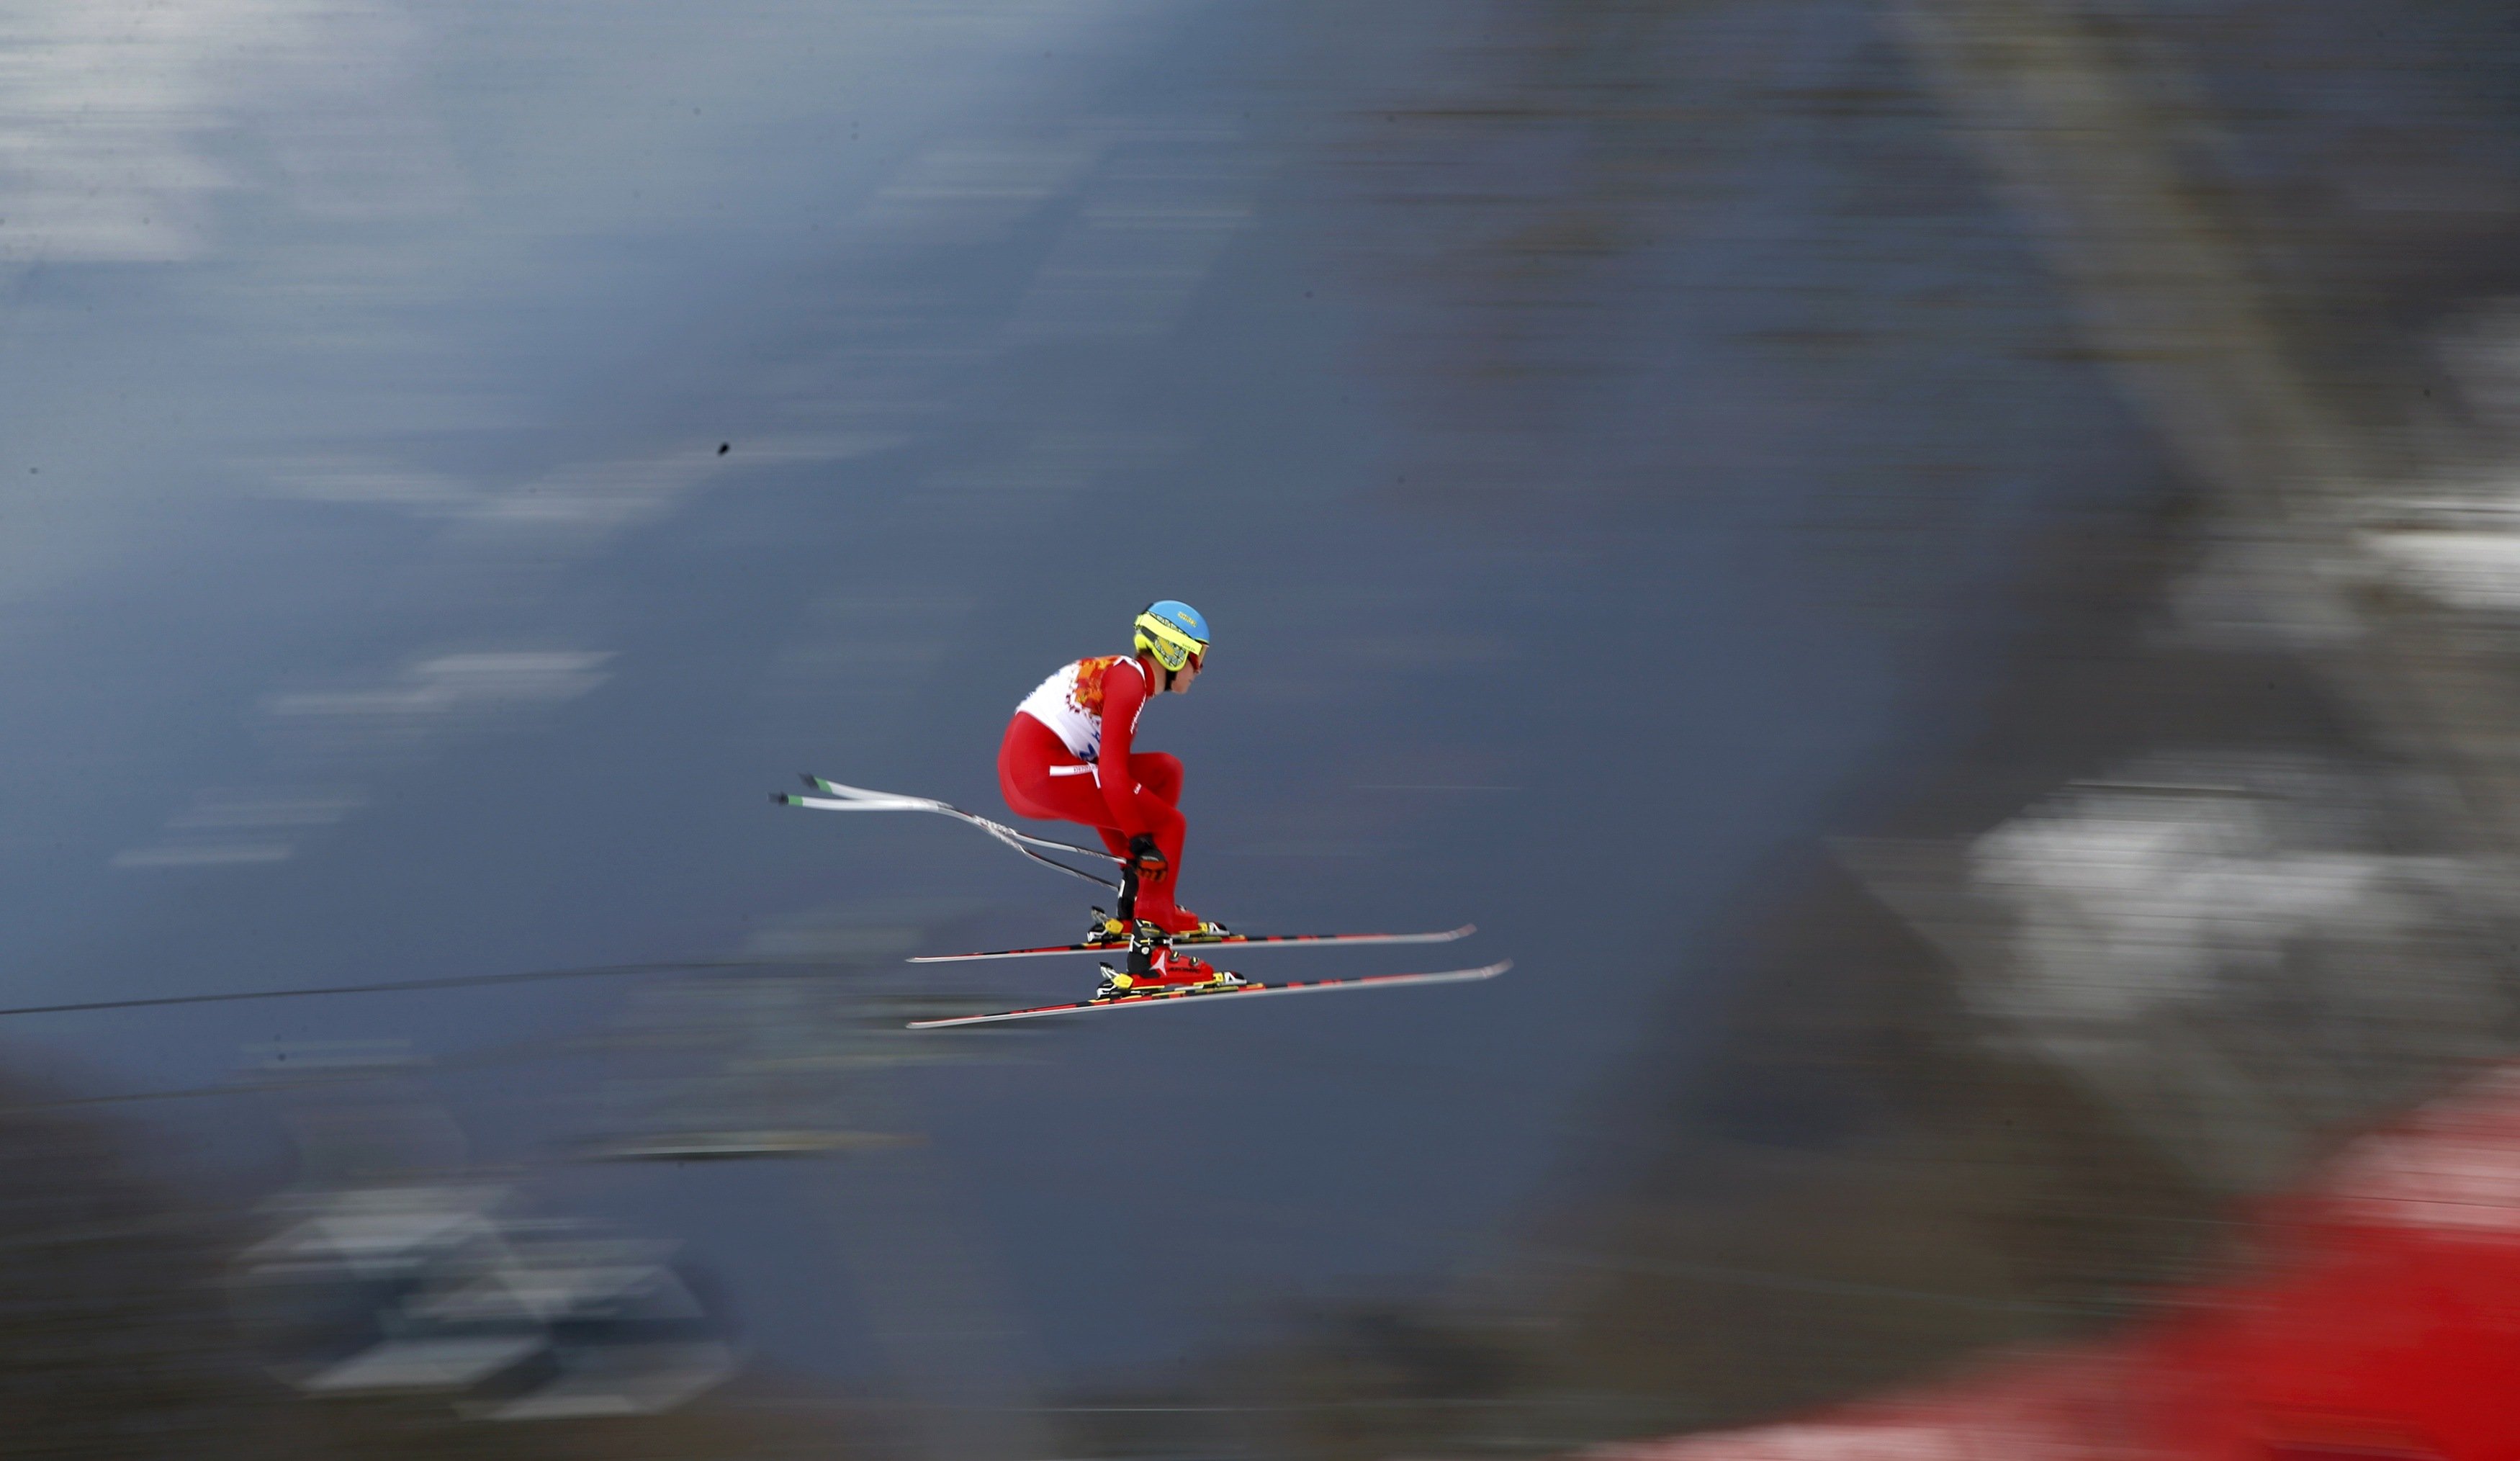 Denmark's Christoffer Faarup goes airborne during the downhill run of the men's alpine skiing super combined training session.